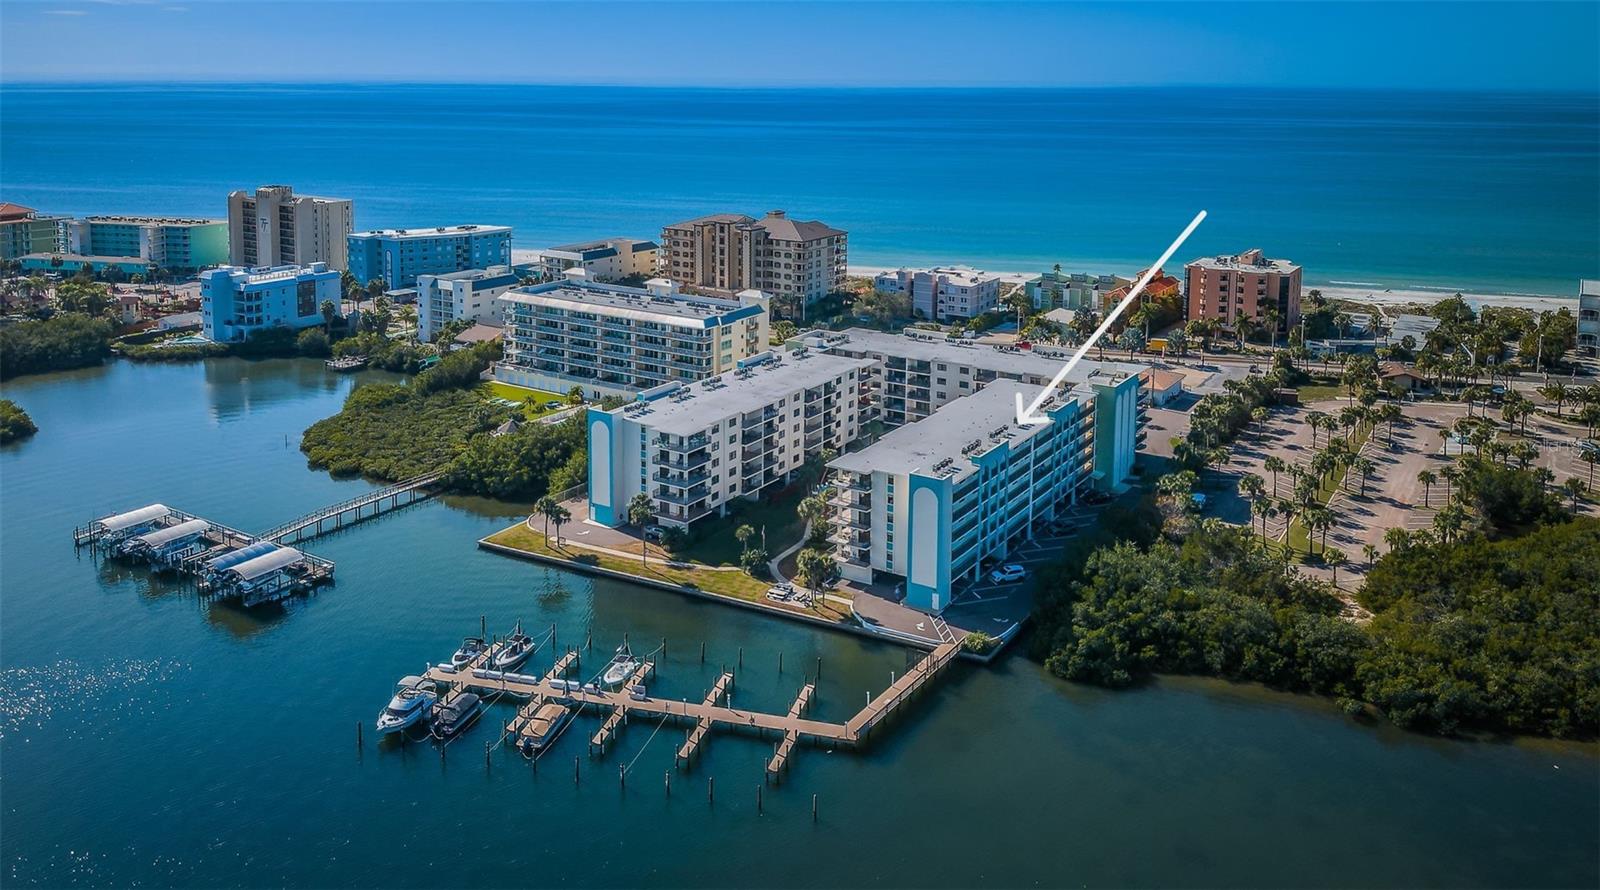 Golden Shores Condos aerial view with Community Boat Slips - First Come, First Serve!